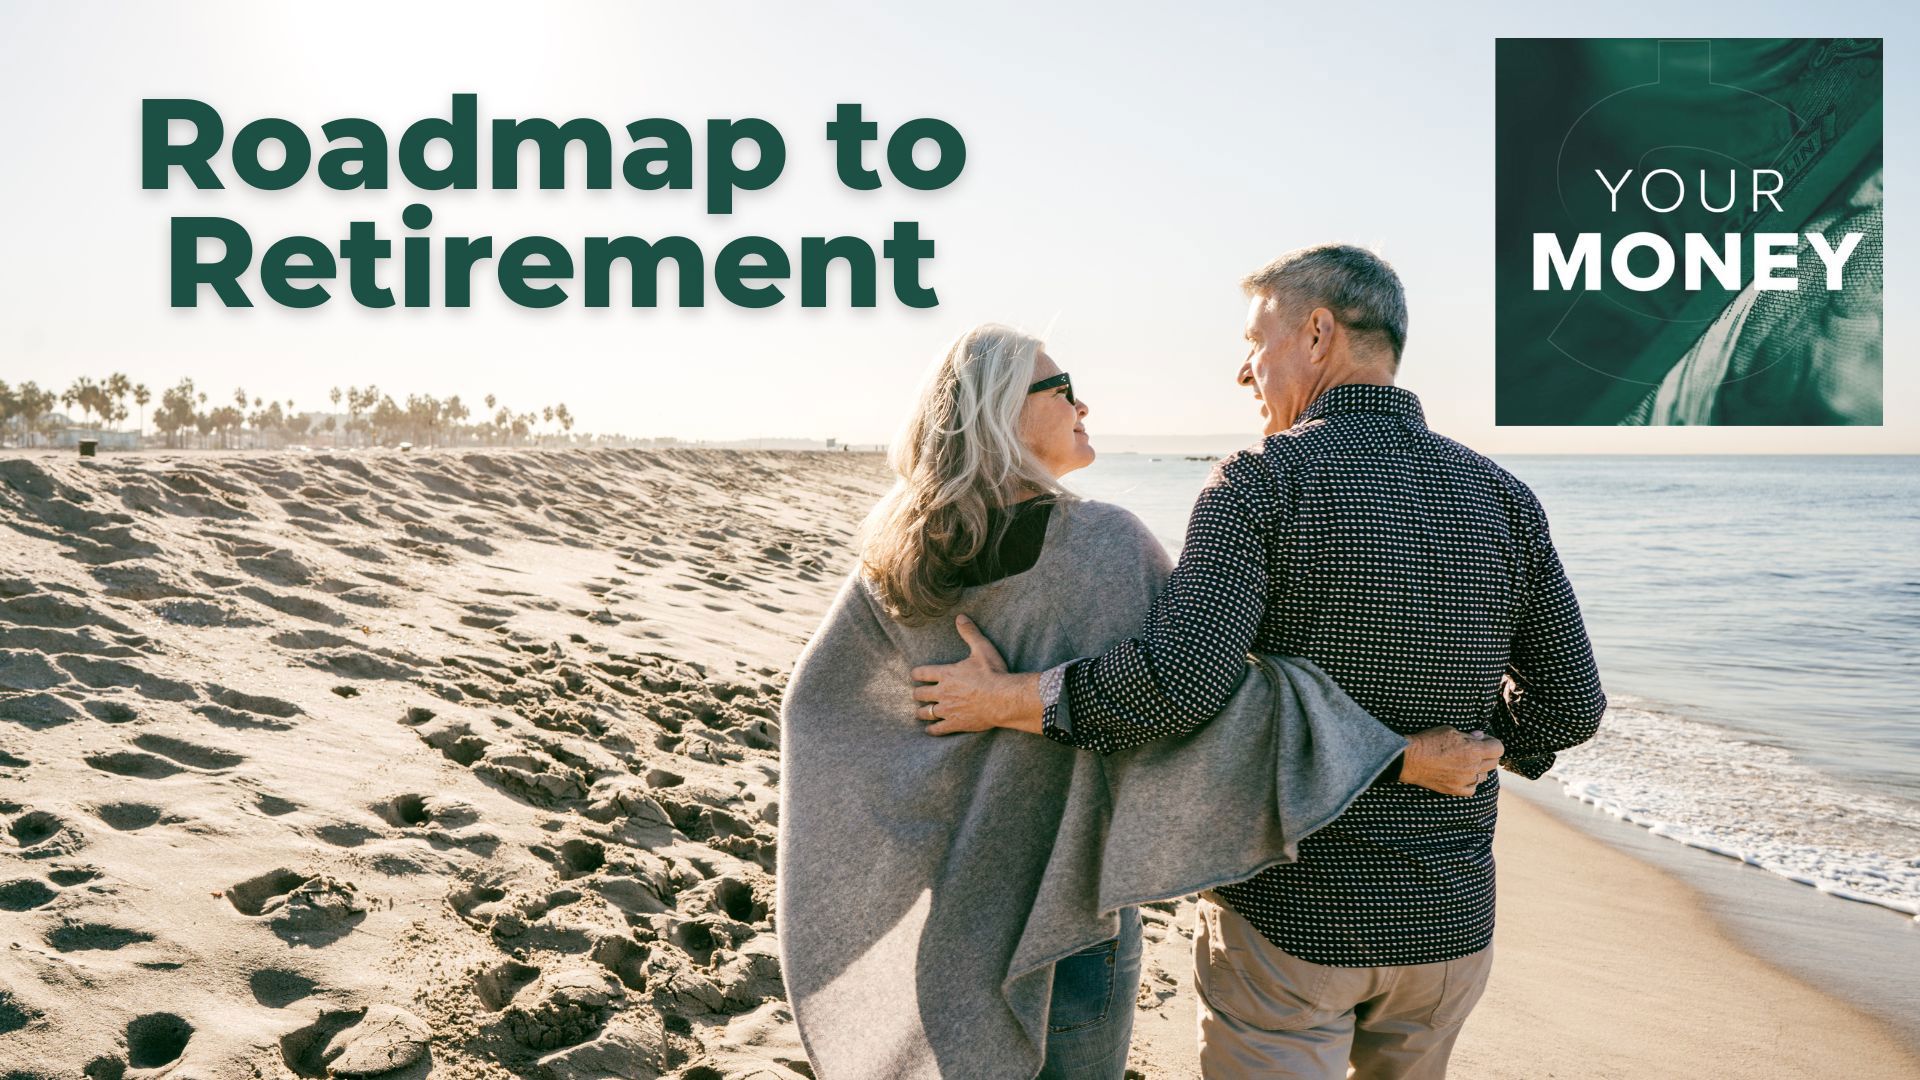 Gordon Severson shares your roadmap to retirement. A look at how to know you are on track and advice from the experts.